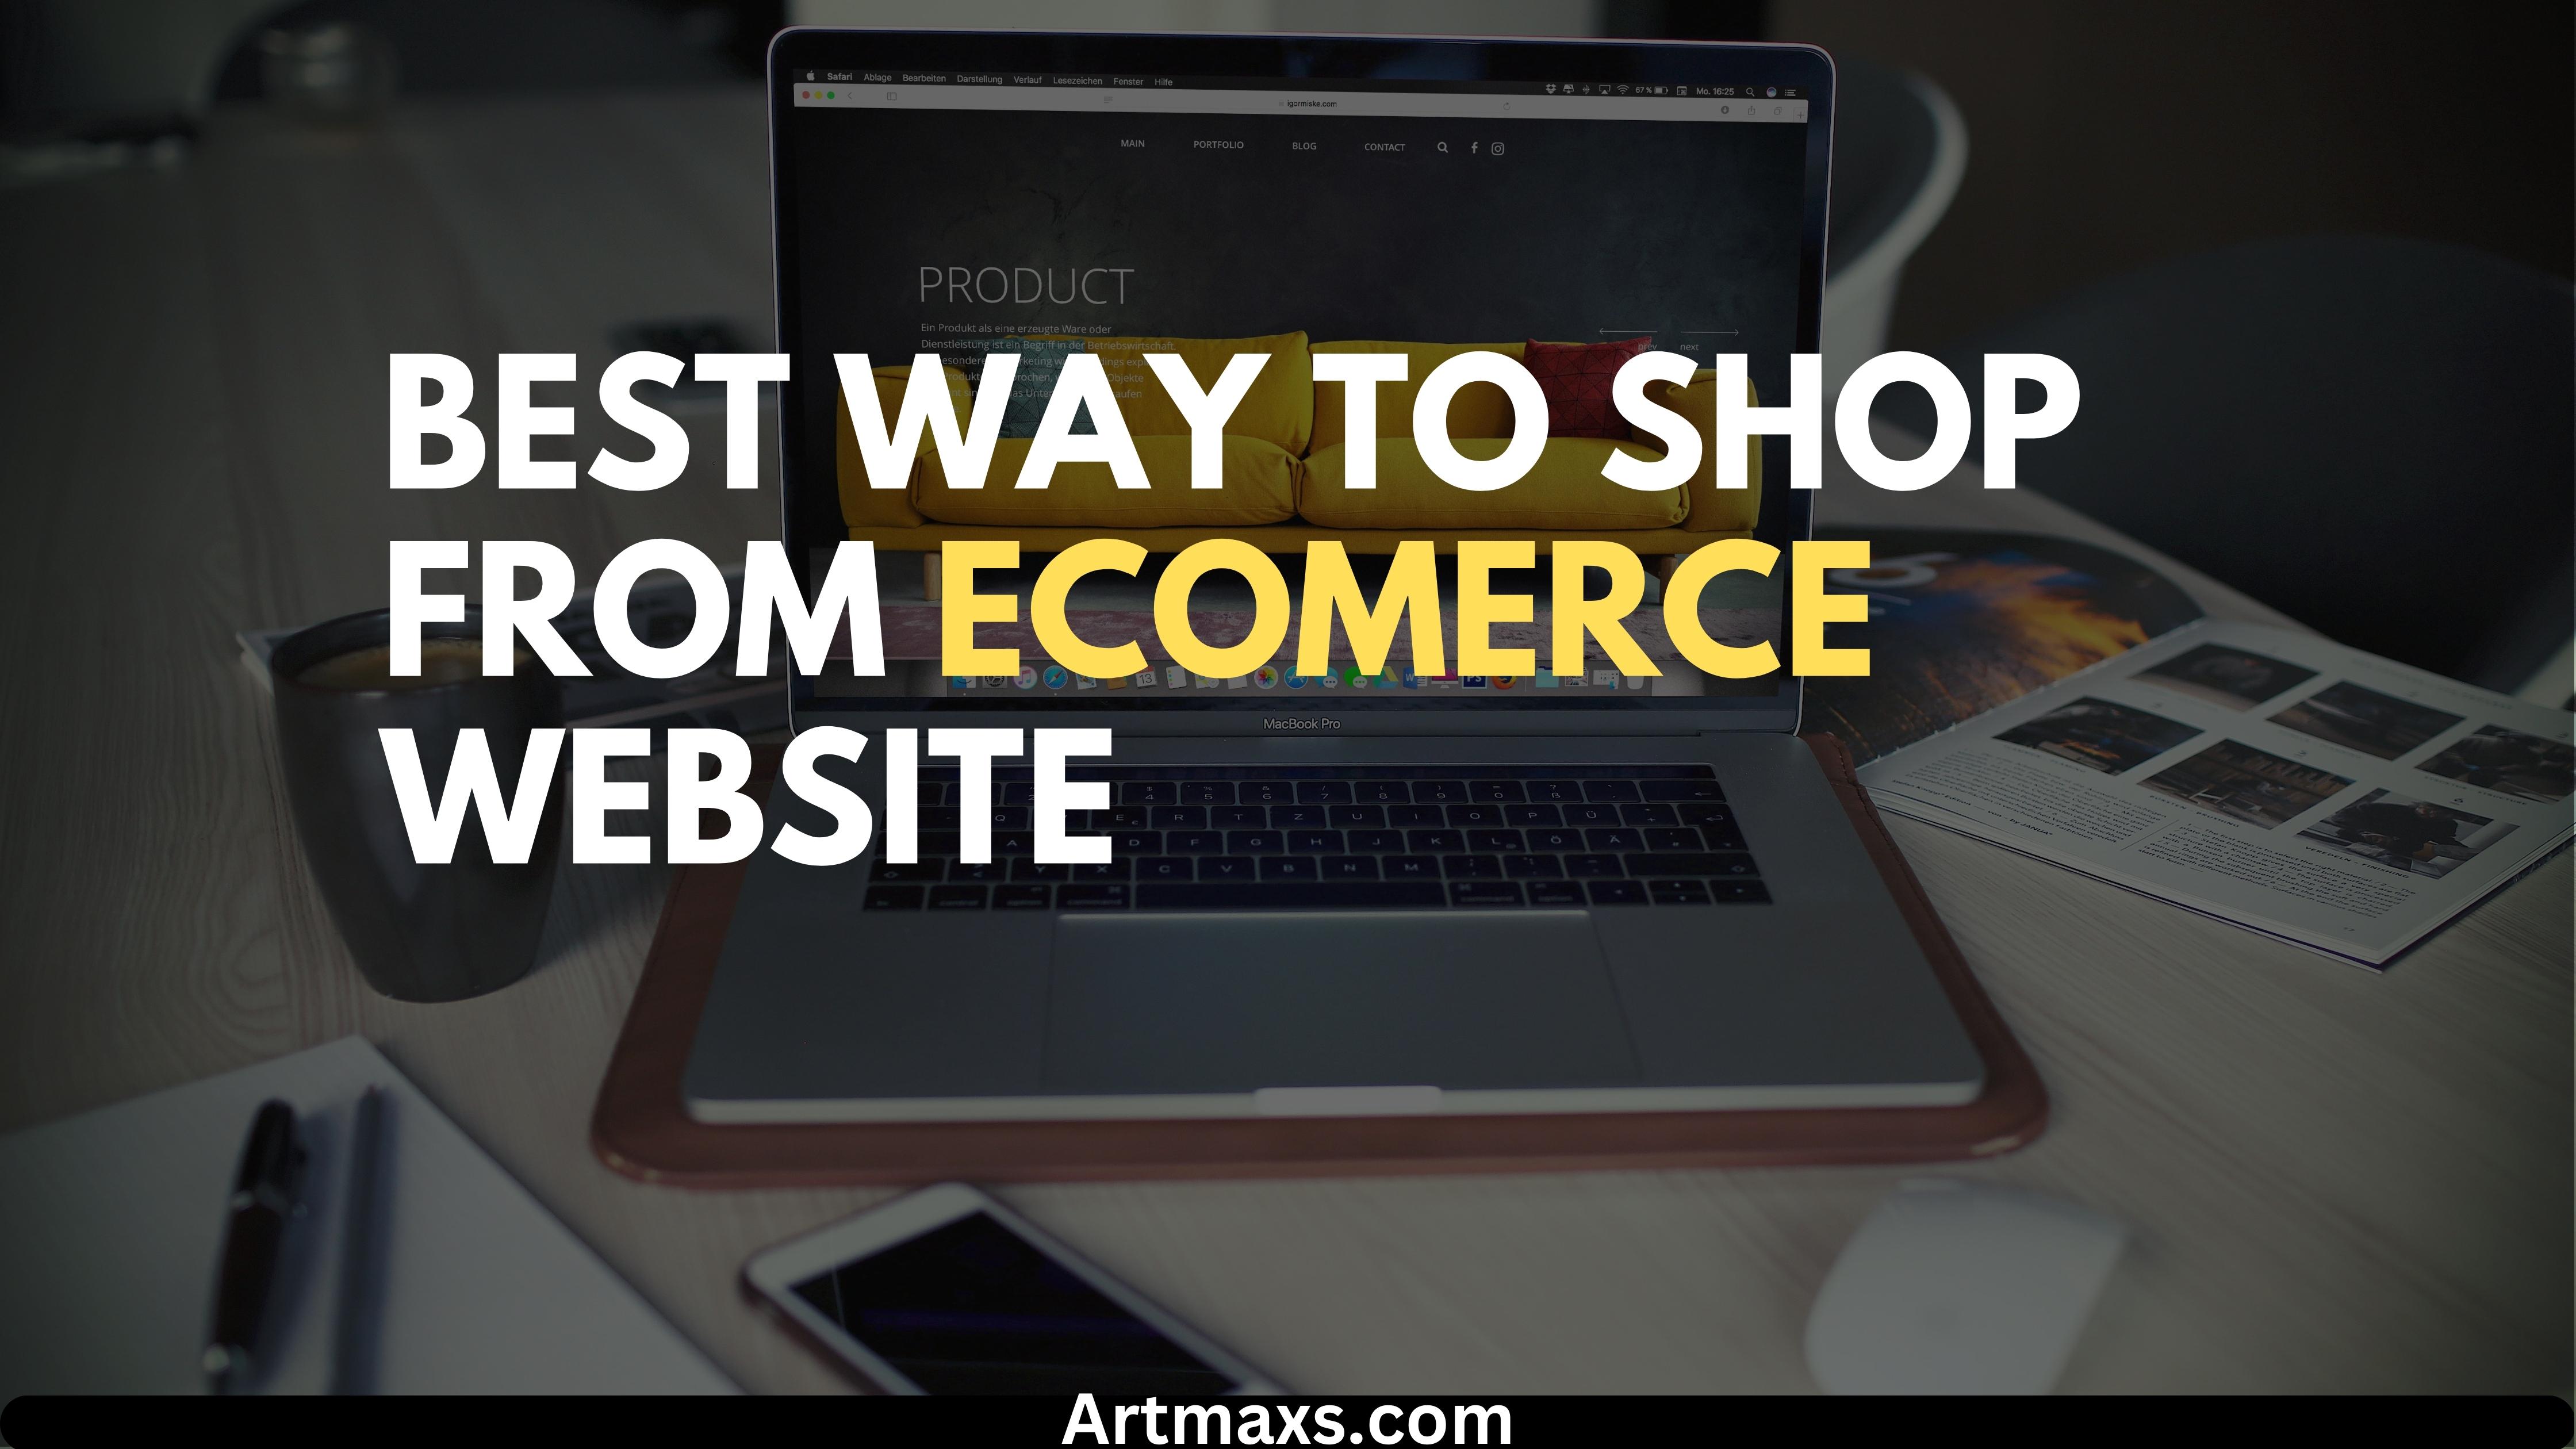 Best Way to Shop from ecomerce Website